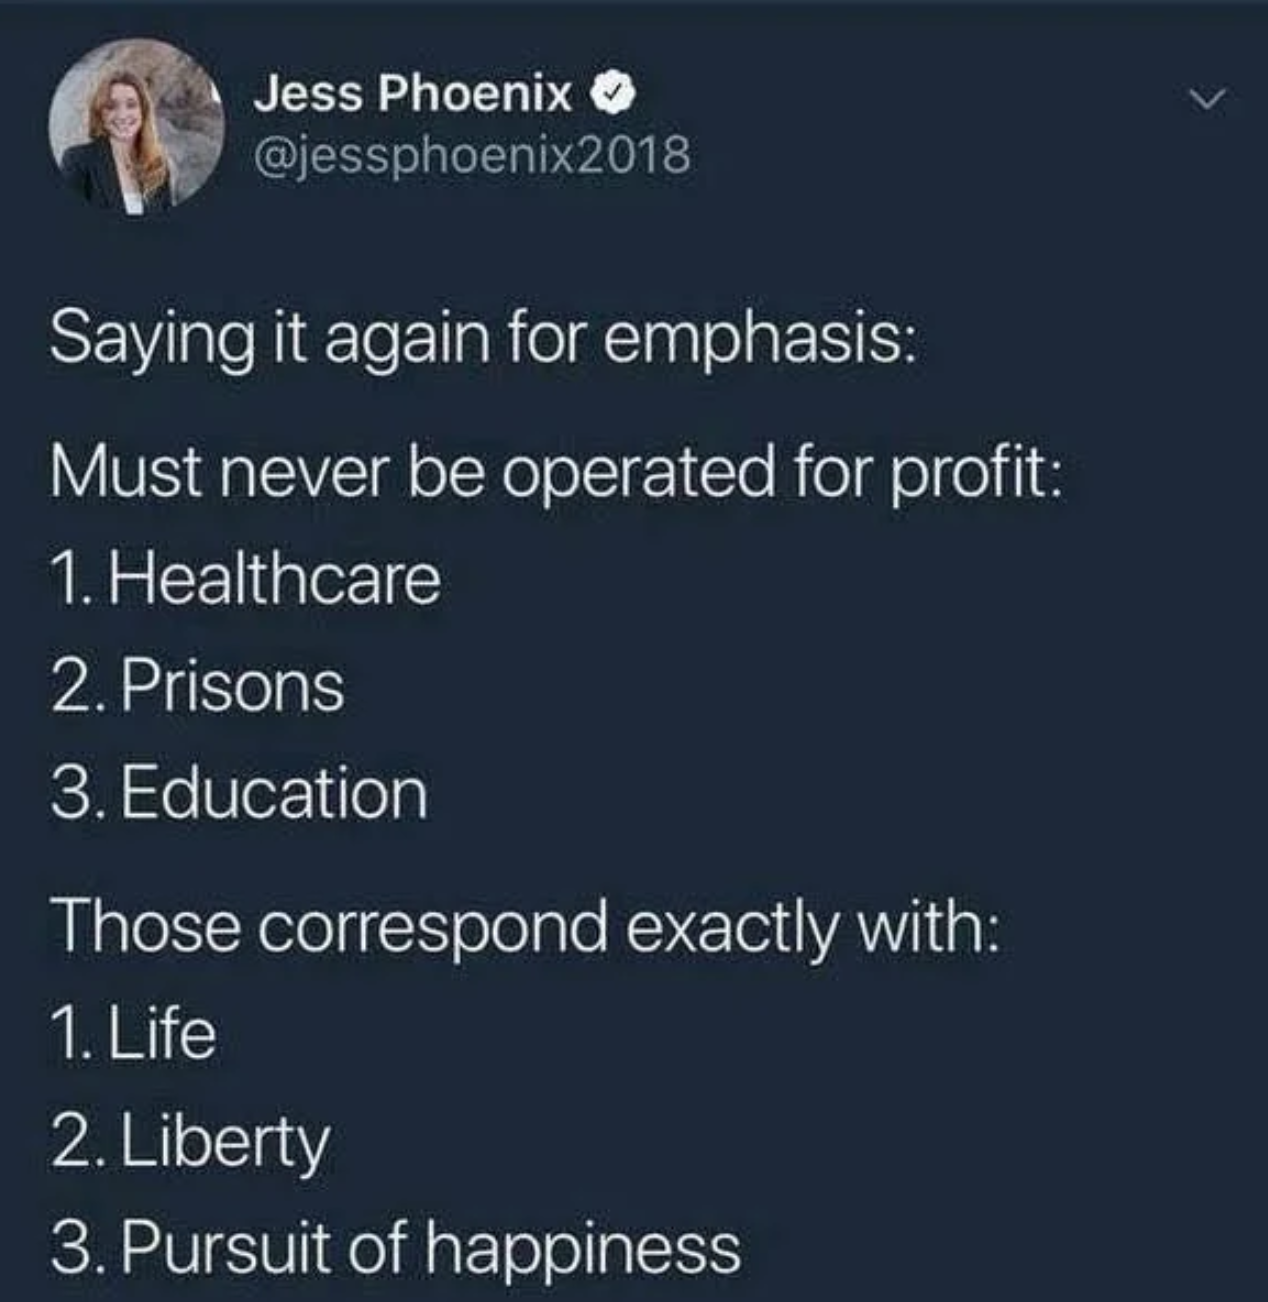 atmosphere - Jess Phoenix Saying it again for emphasis Must never be operated for profit 1. Healthcare 2. Prisons 3. Education Those correspond exactly with 1. Life 2. Liberty 3. Pursuit of happiness